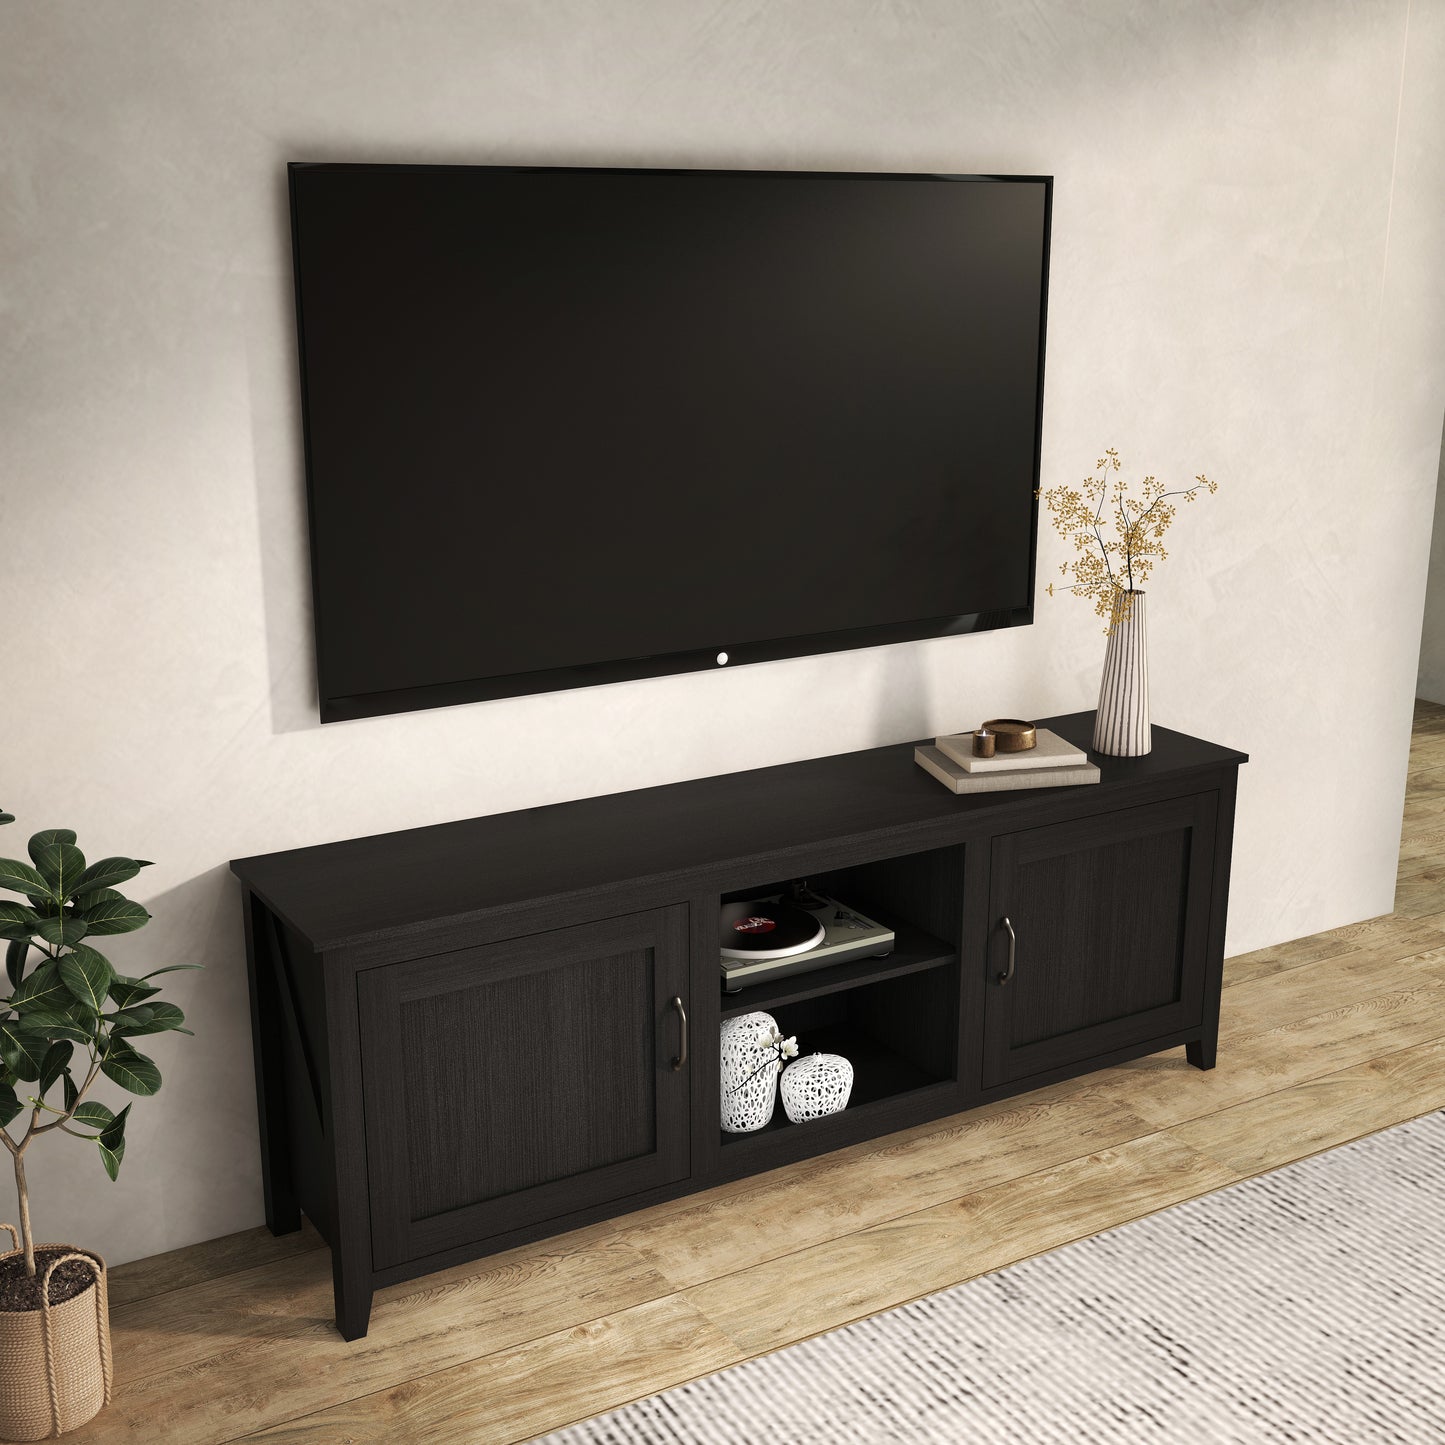 TV Stand Storage Media Console Entertainment Center; Tradition Black; with doors